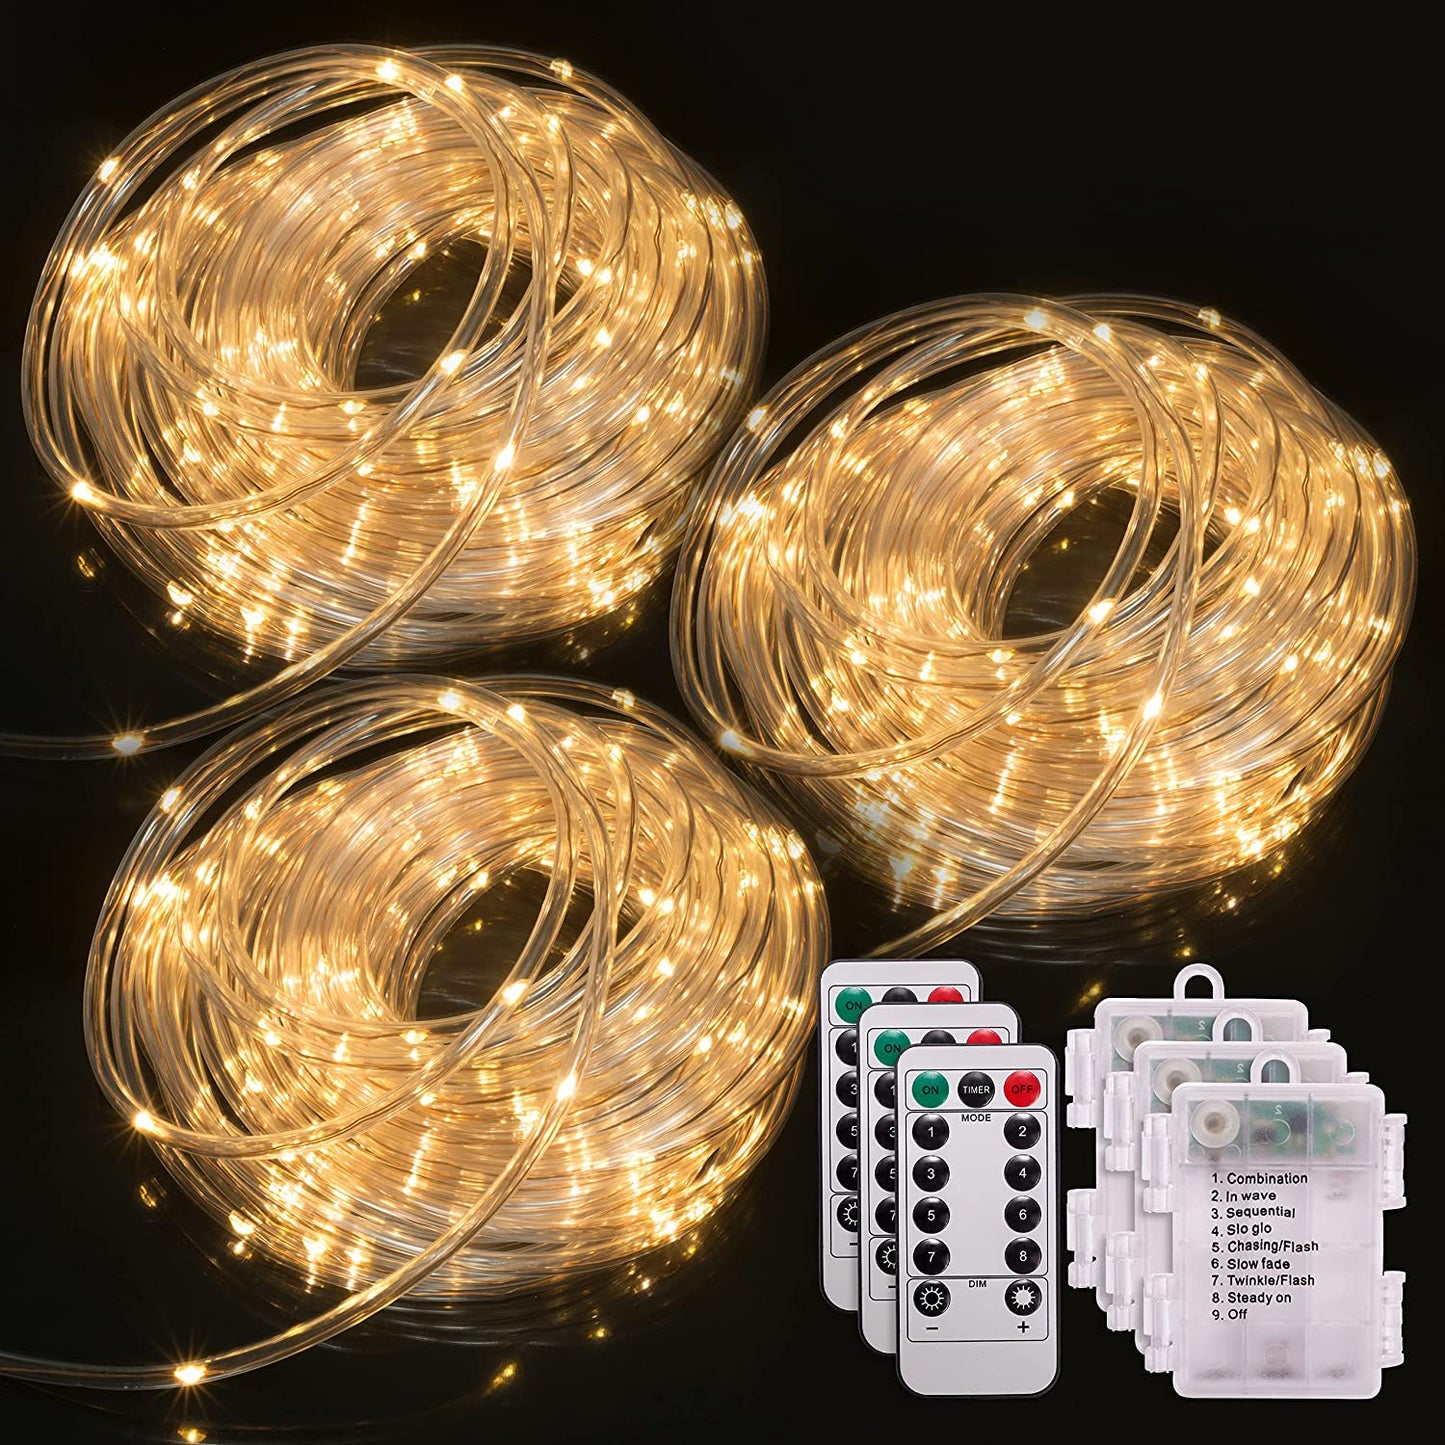 46ft 120 Count LED Rope Light with Remote Control -3 Pcs